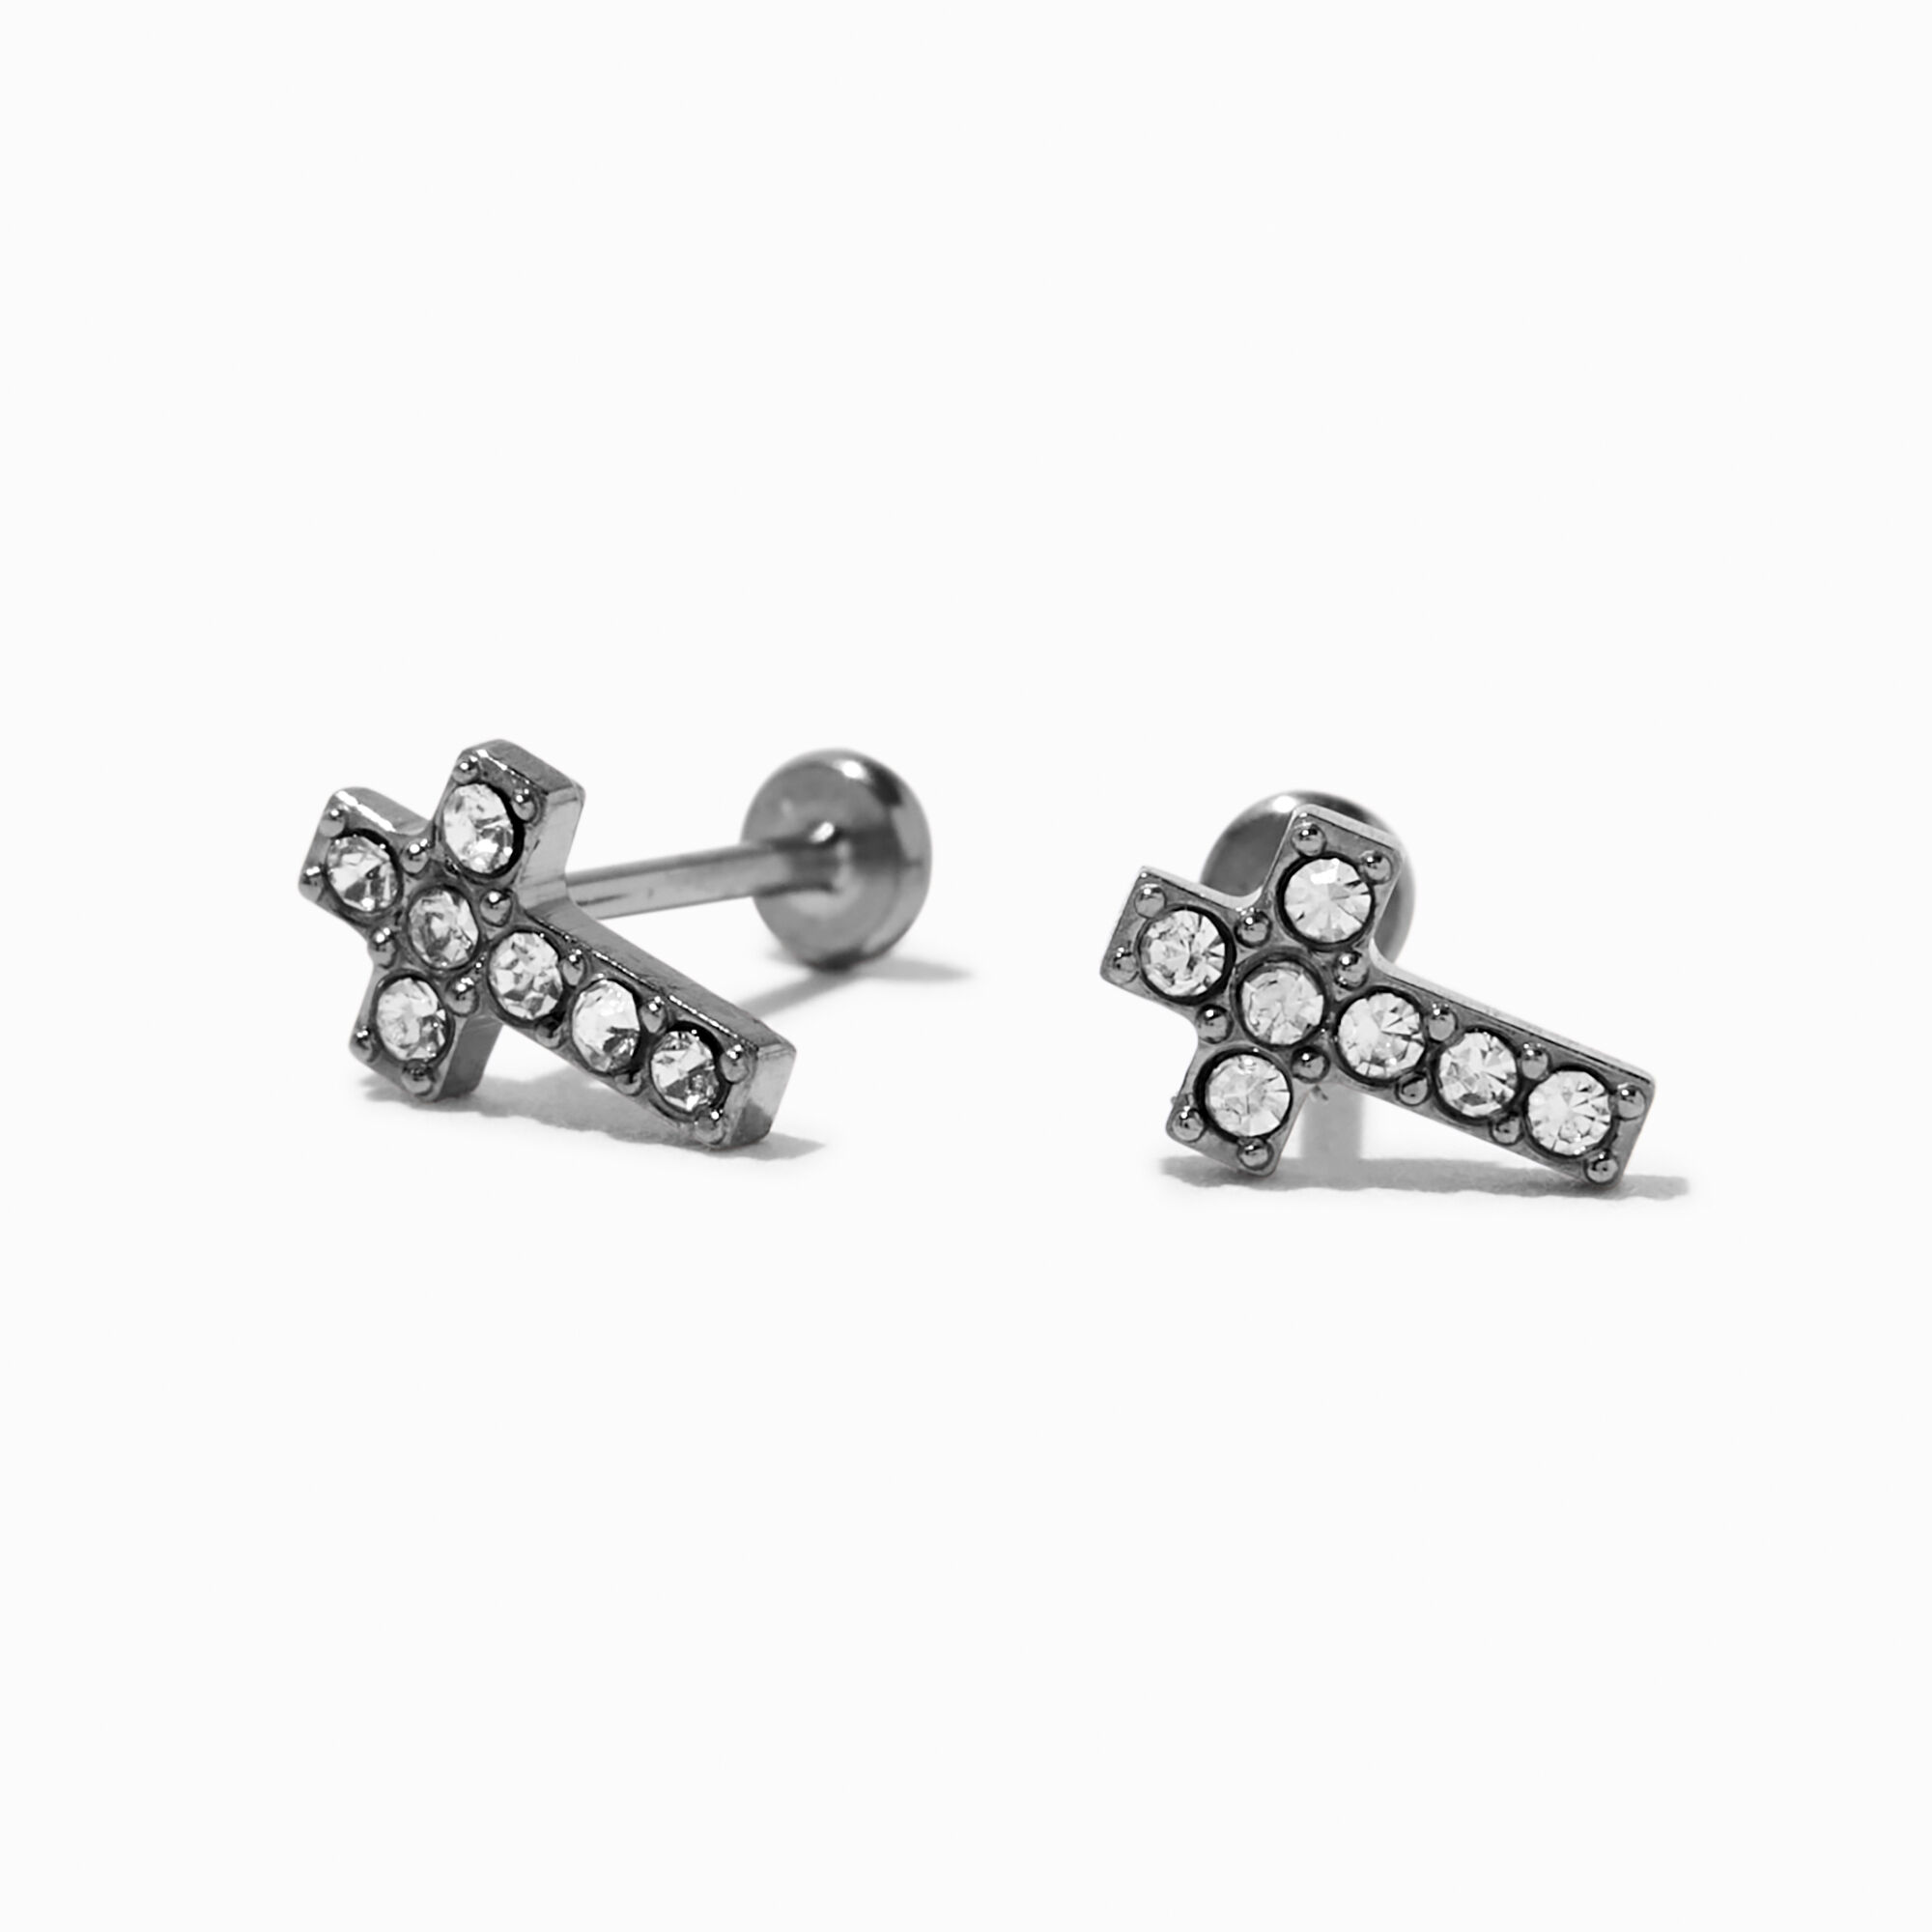 View C Luxe By Claires Tone Titanium Crystal Cross Flat Back Stud Earrings Silver information